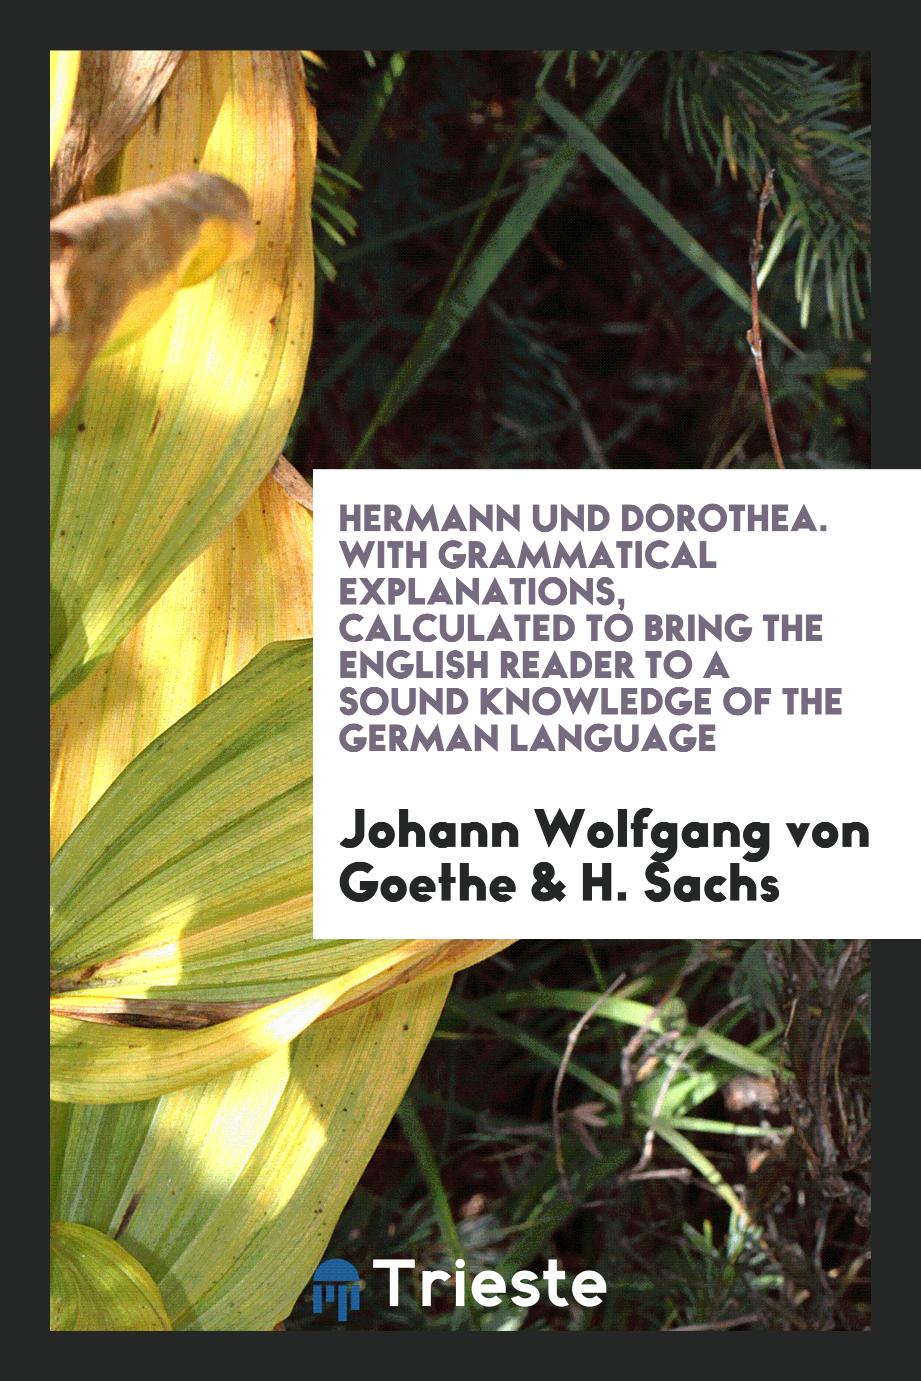 Hermann und Dorothea. With Grammatical Explanations, Calculated to Bring the English Reader to a Sound Knowledge of the German Language